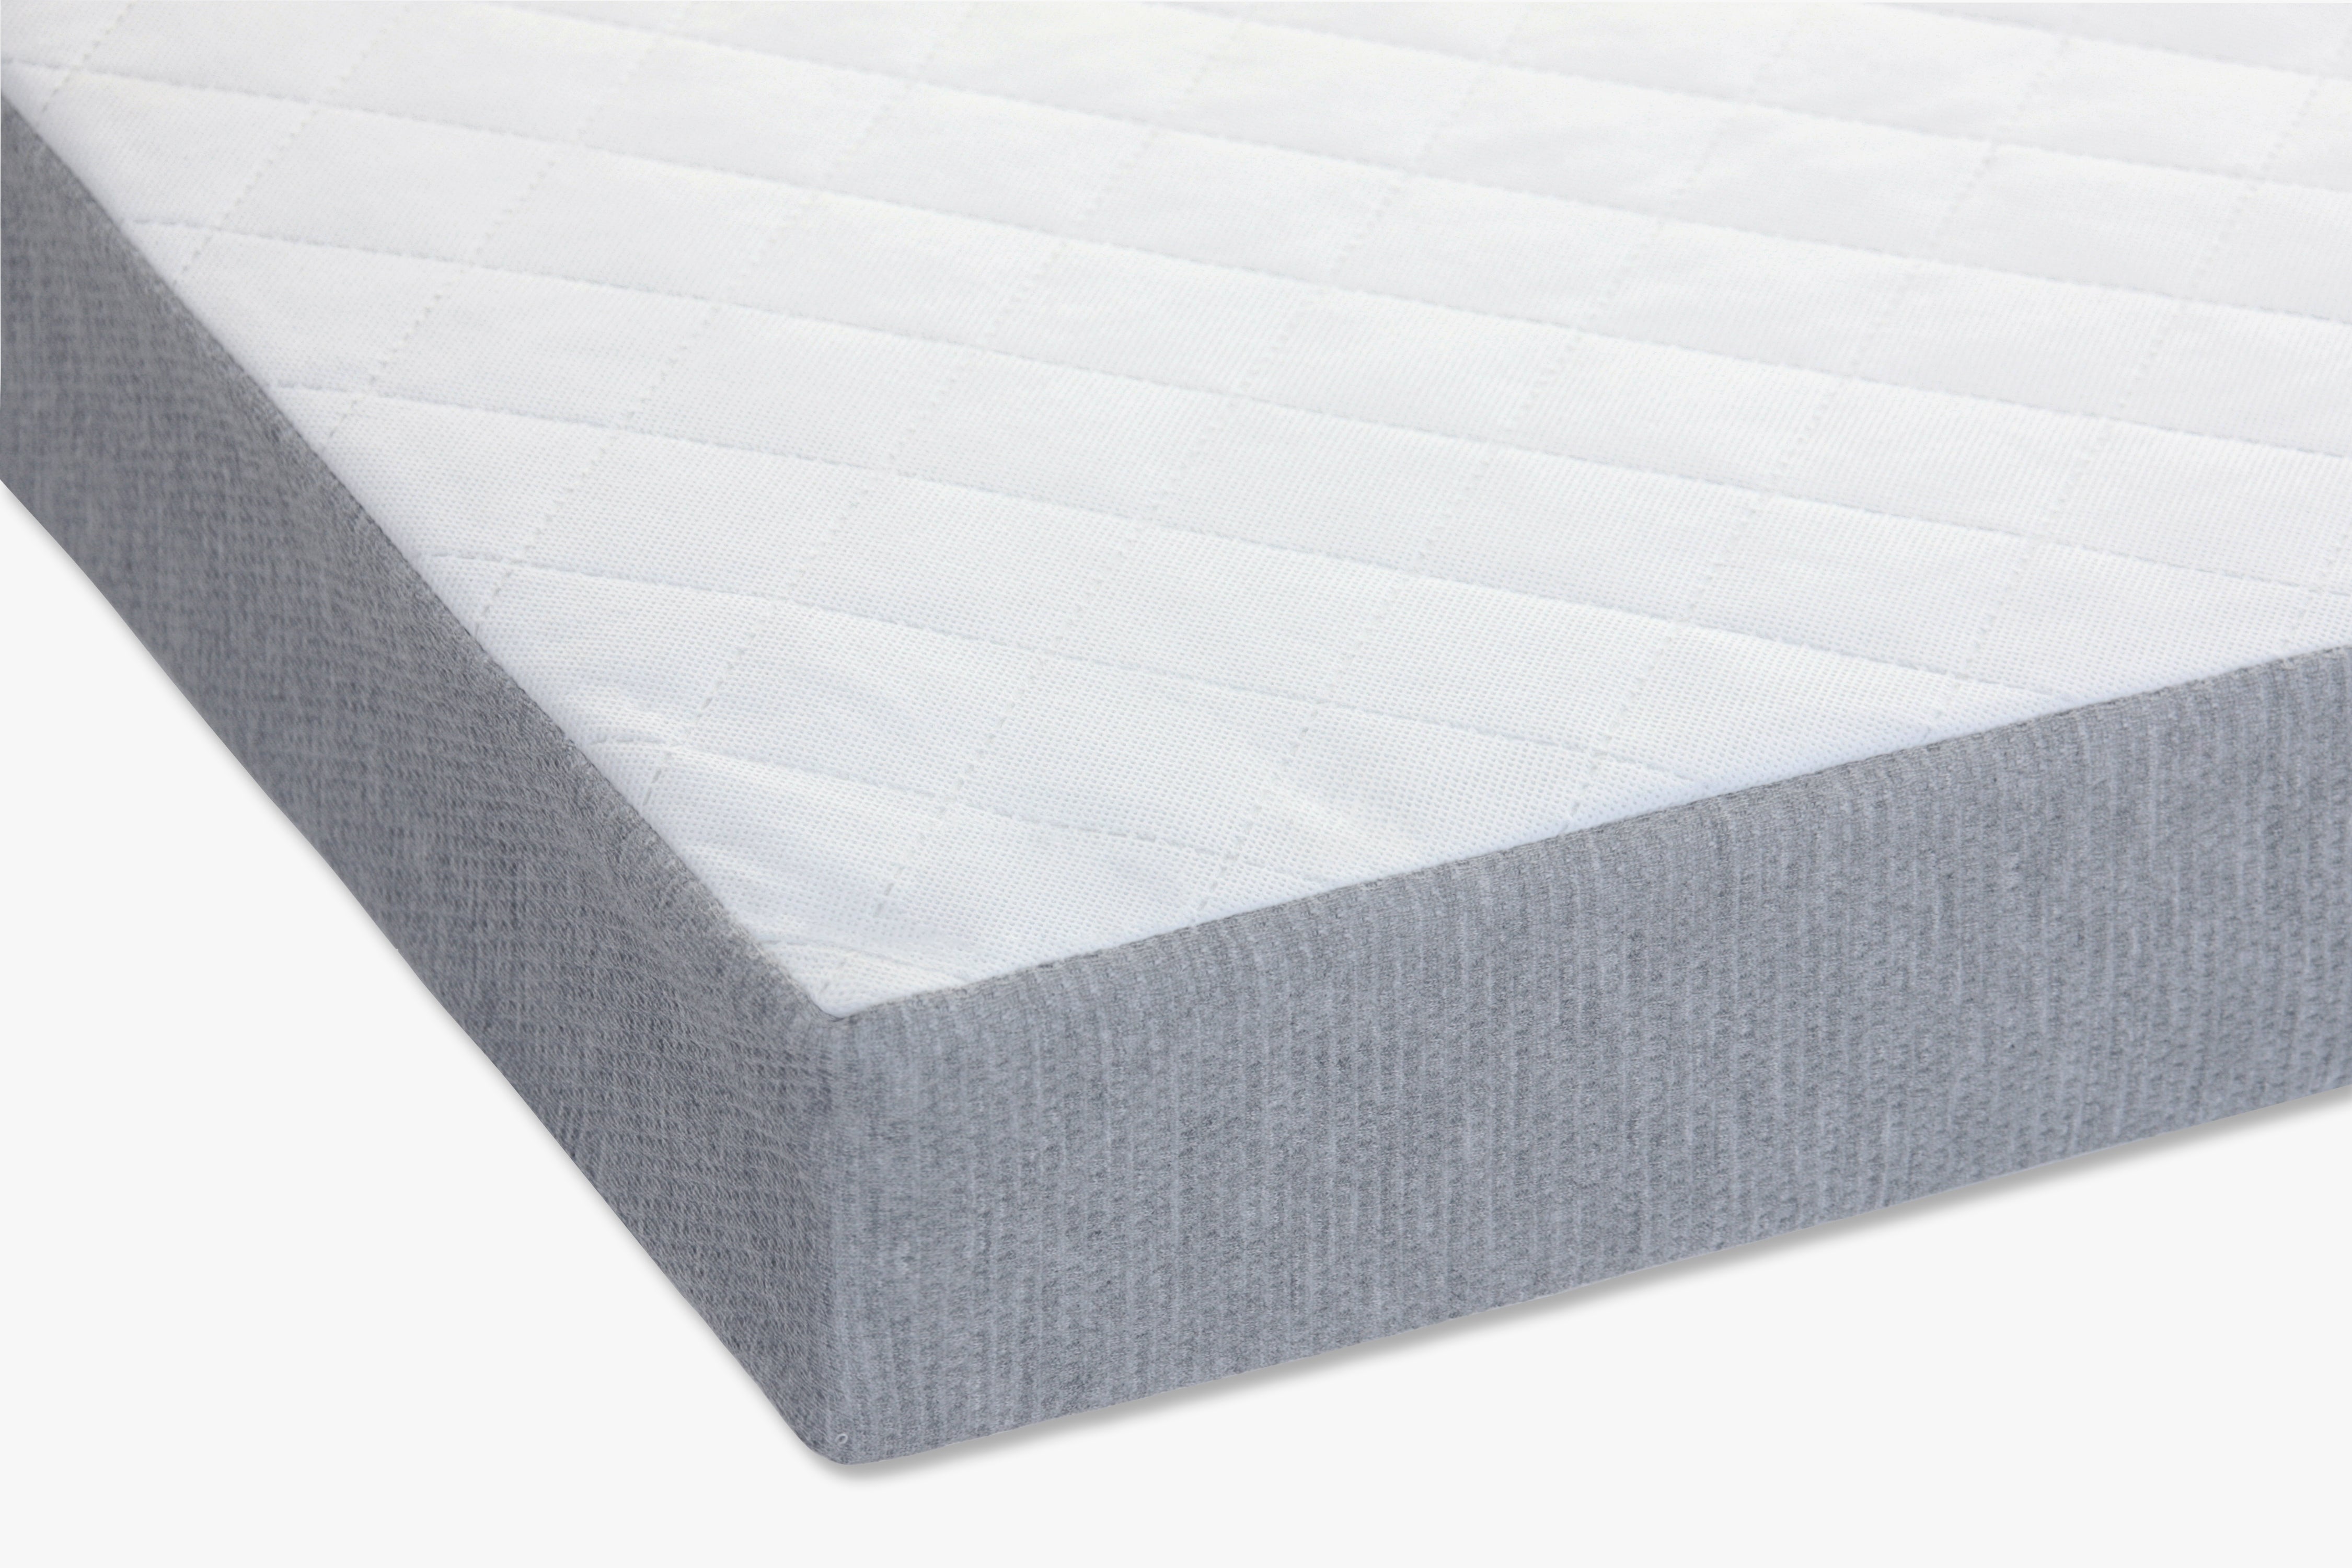 Cool Ecoflow Baby Mattress 140x70cm - 15% OFF Applied at Checkout